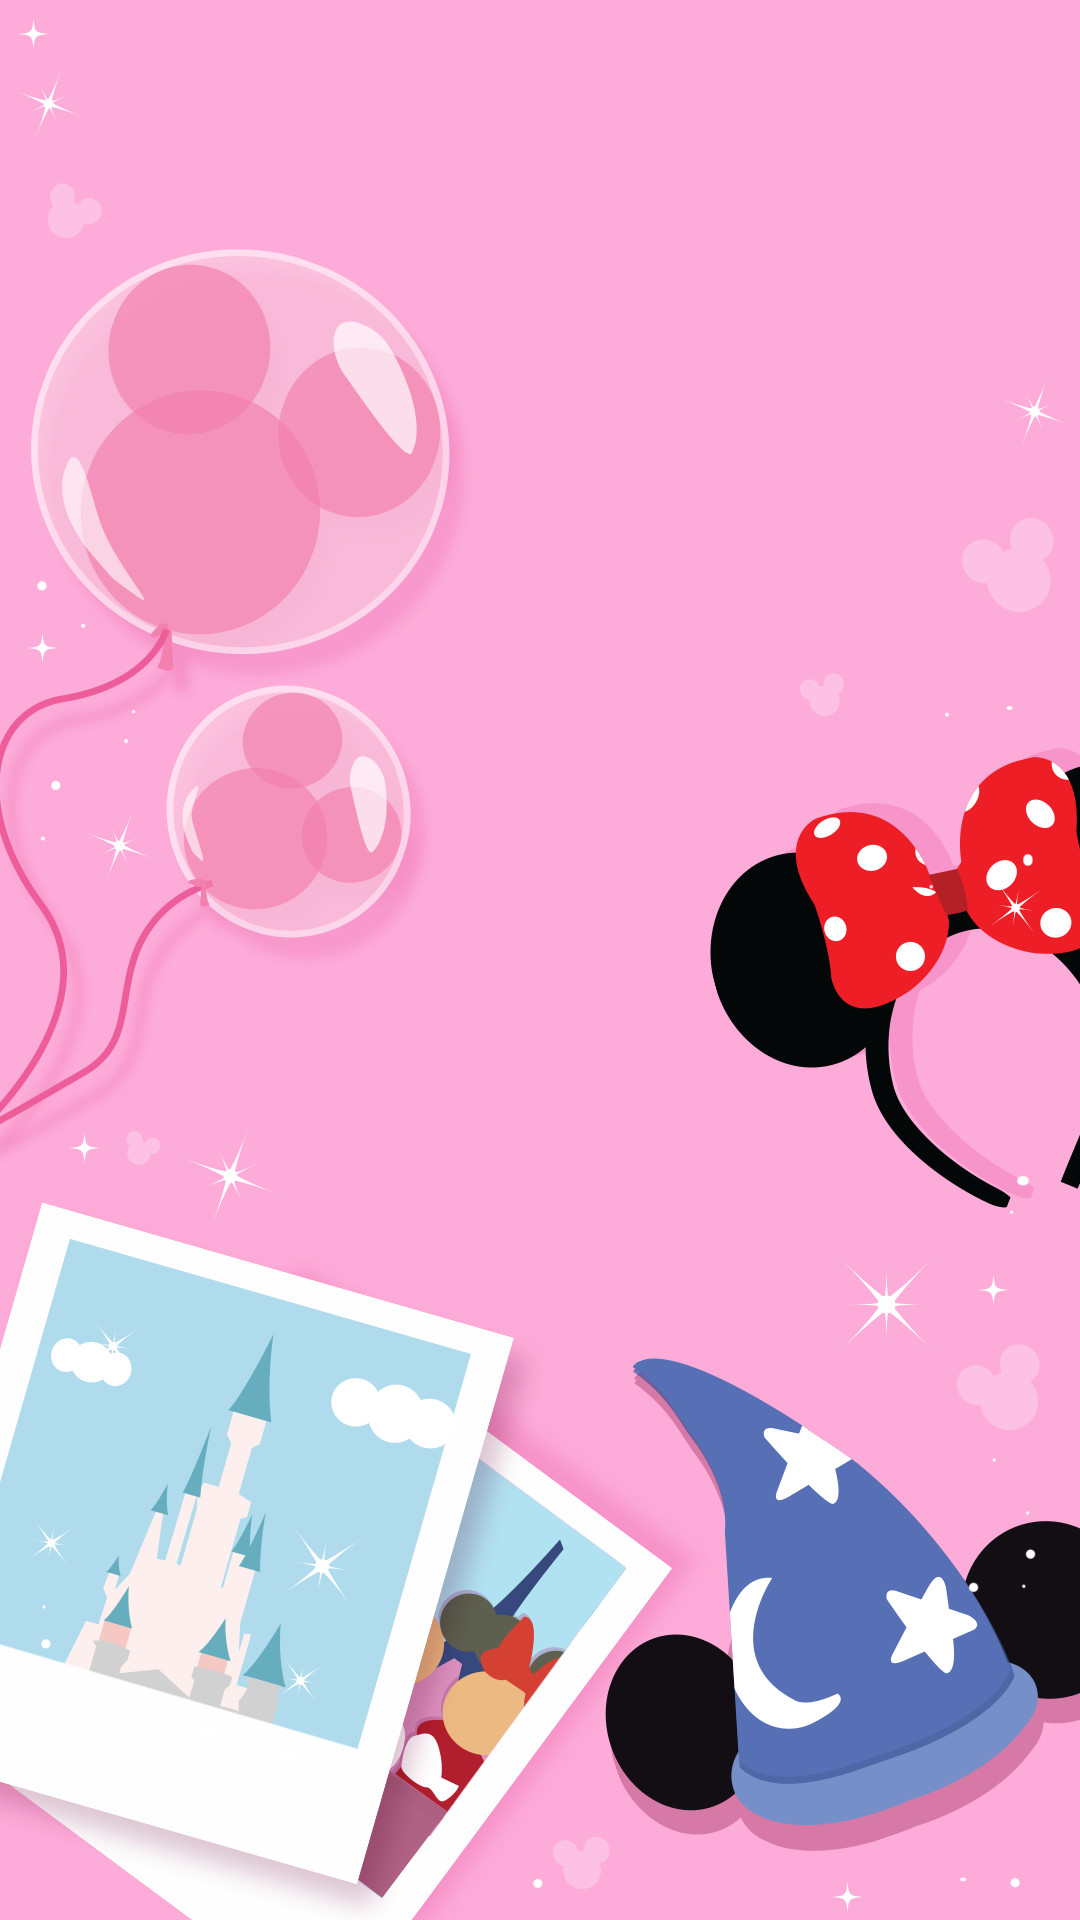 1080x1920 iPhone Wall tjn. iPhone Wall tjn Cool Wallpaper, Wallpaper Backgrounds,  Cute Iphone 6 Wallpaper, Mickey Mouse